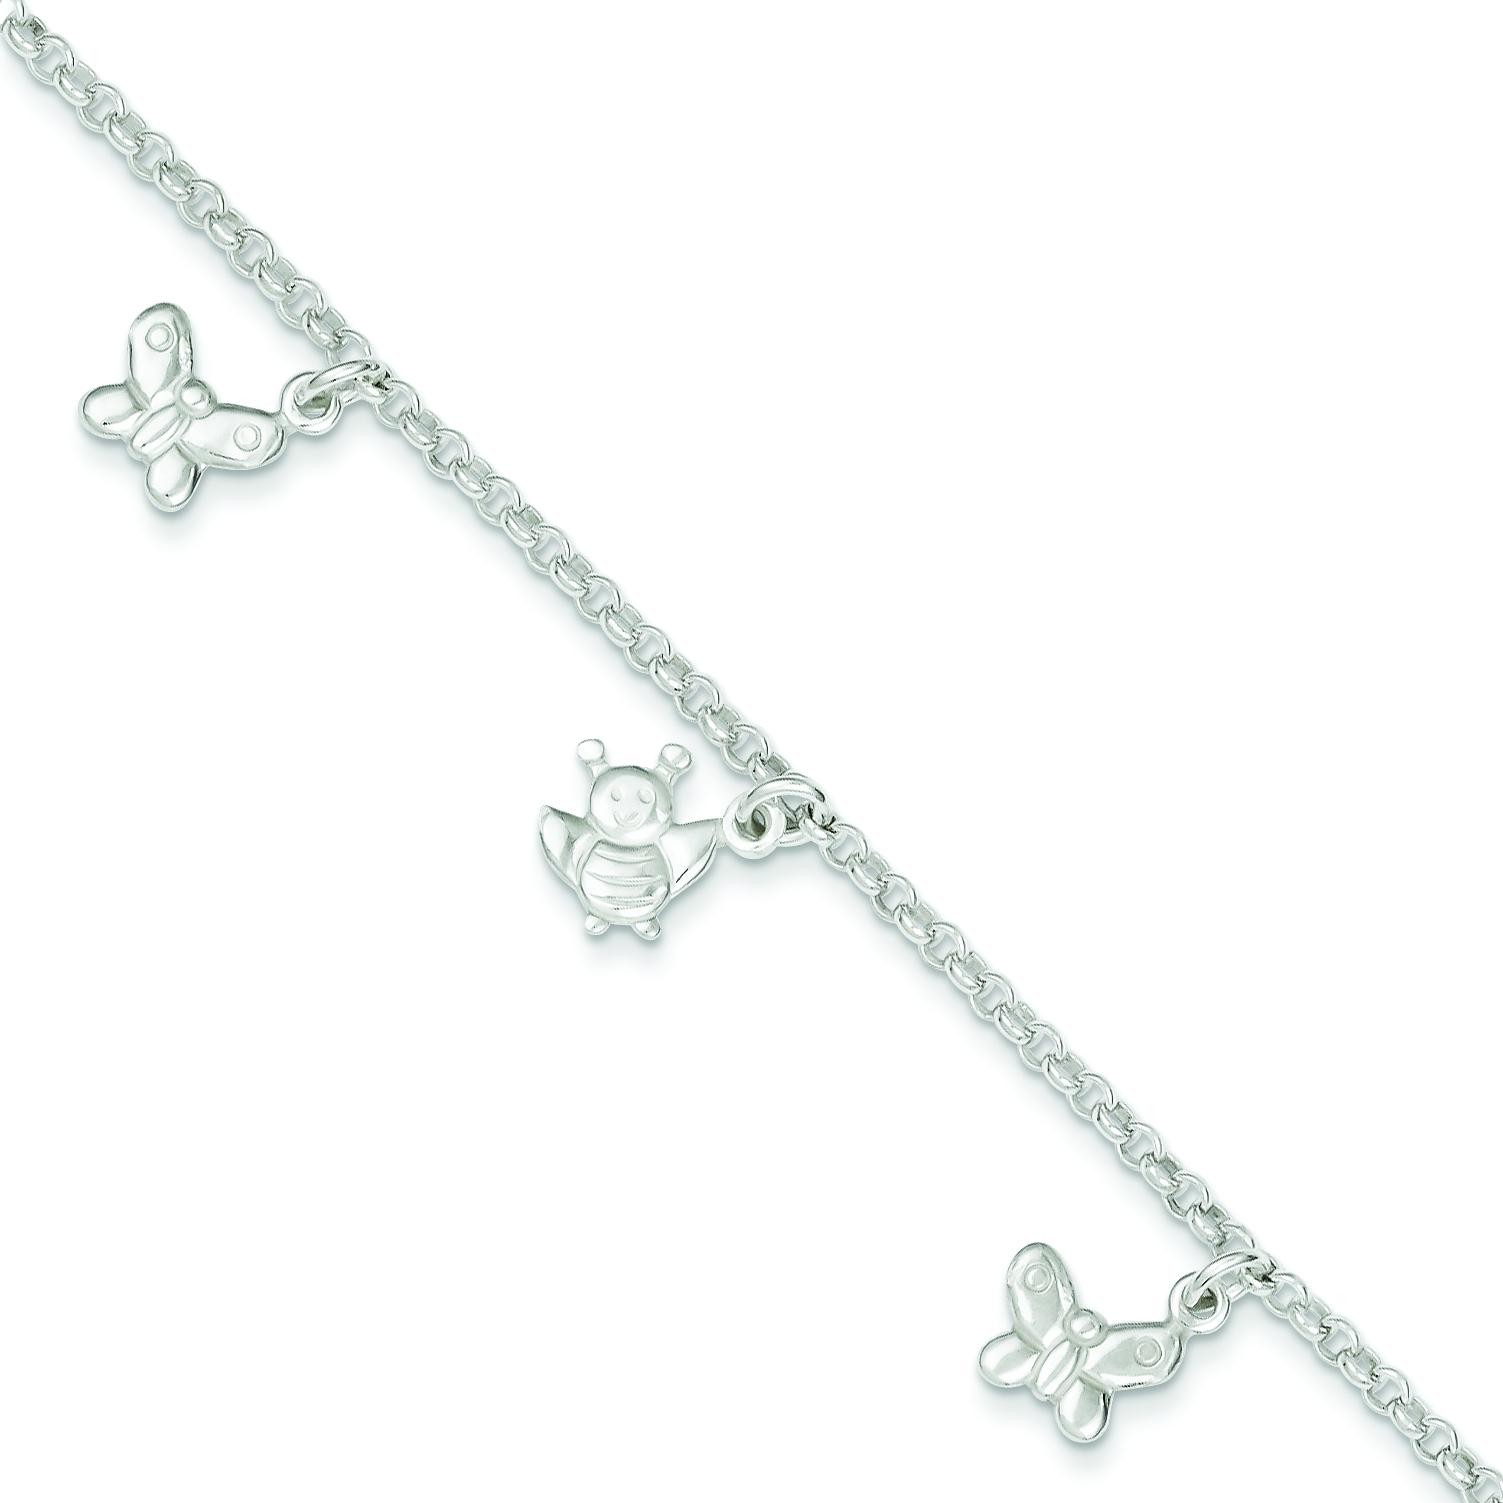 Butterflies Bumble Bee Anklet in Sterling Silver